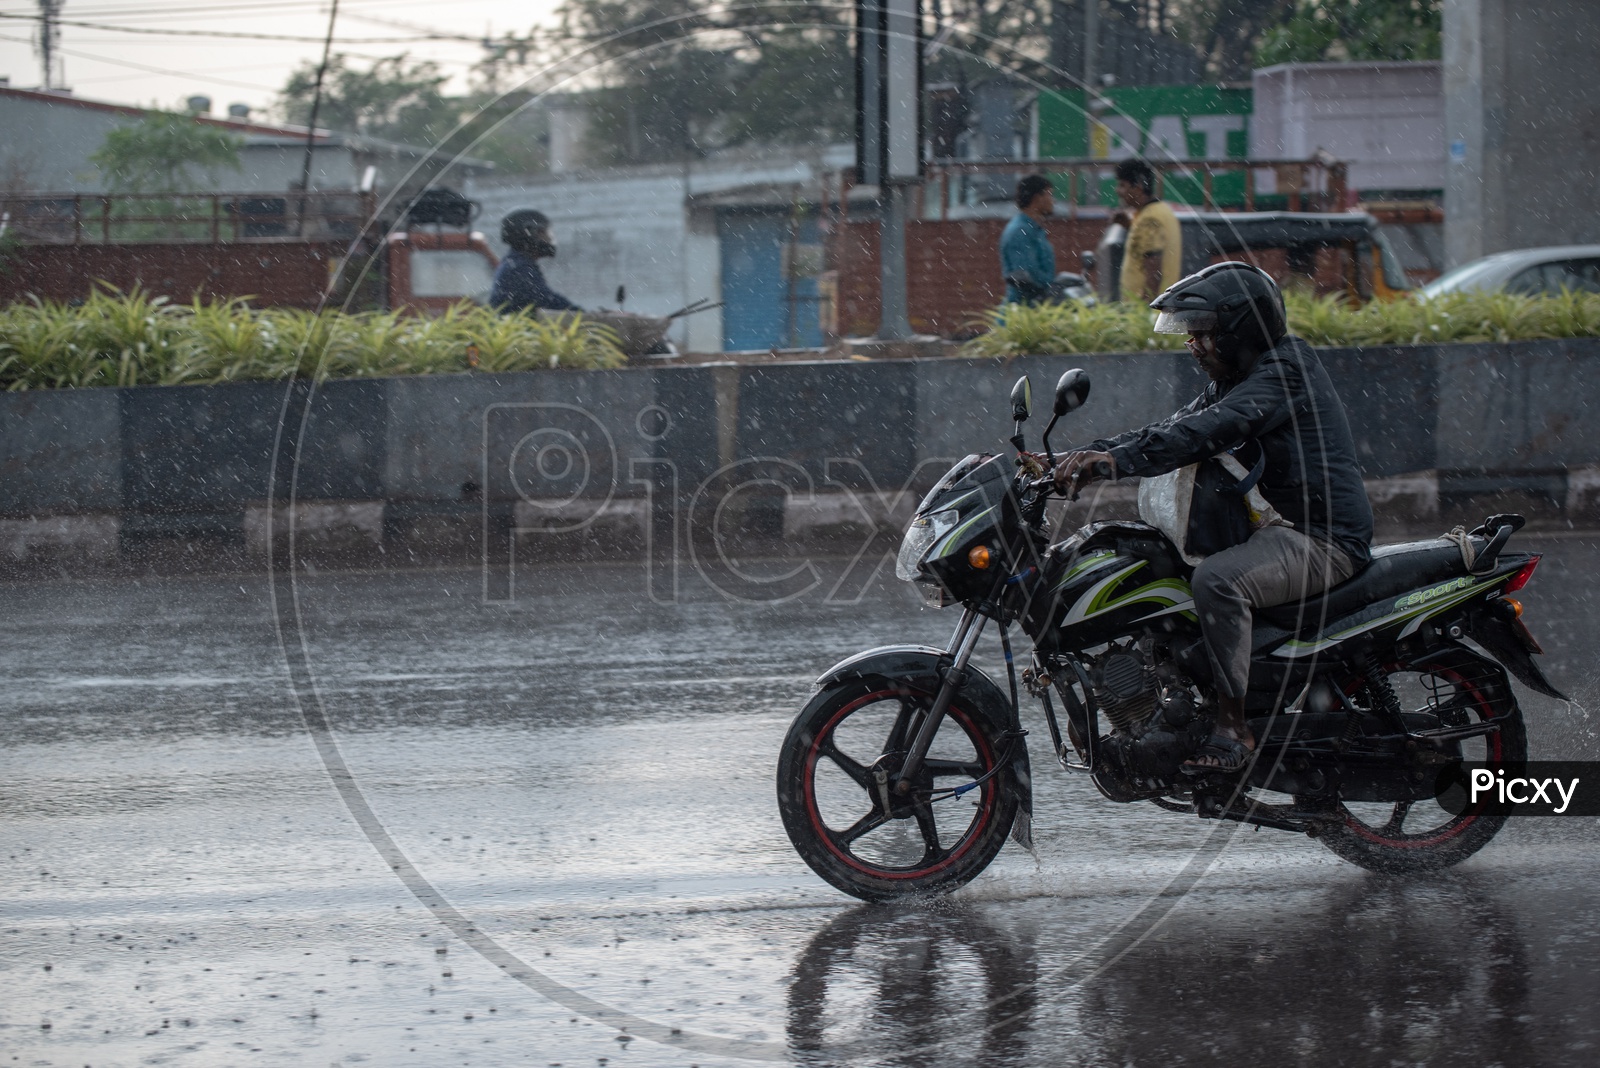 Motorcyclist Or Bikers  on Flooded City Roads With Water Splash on a Rainy Day